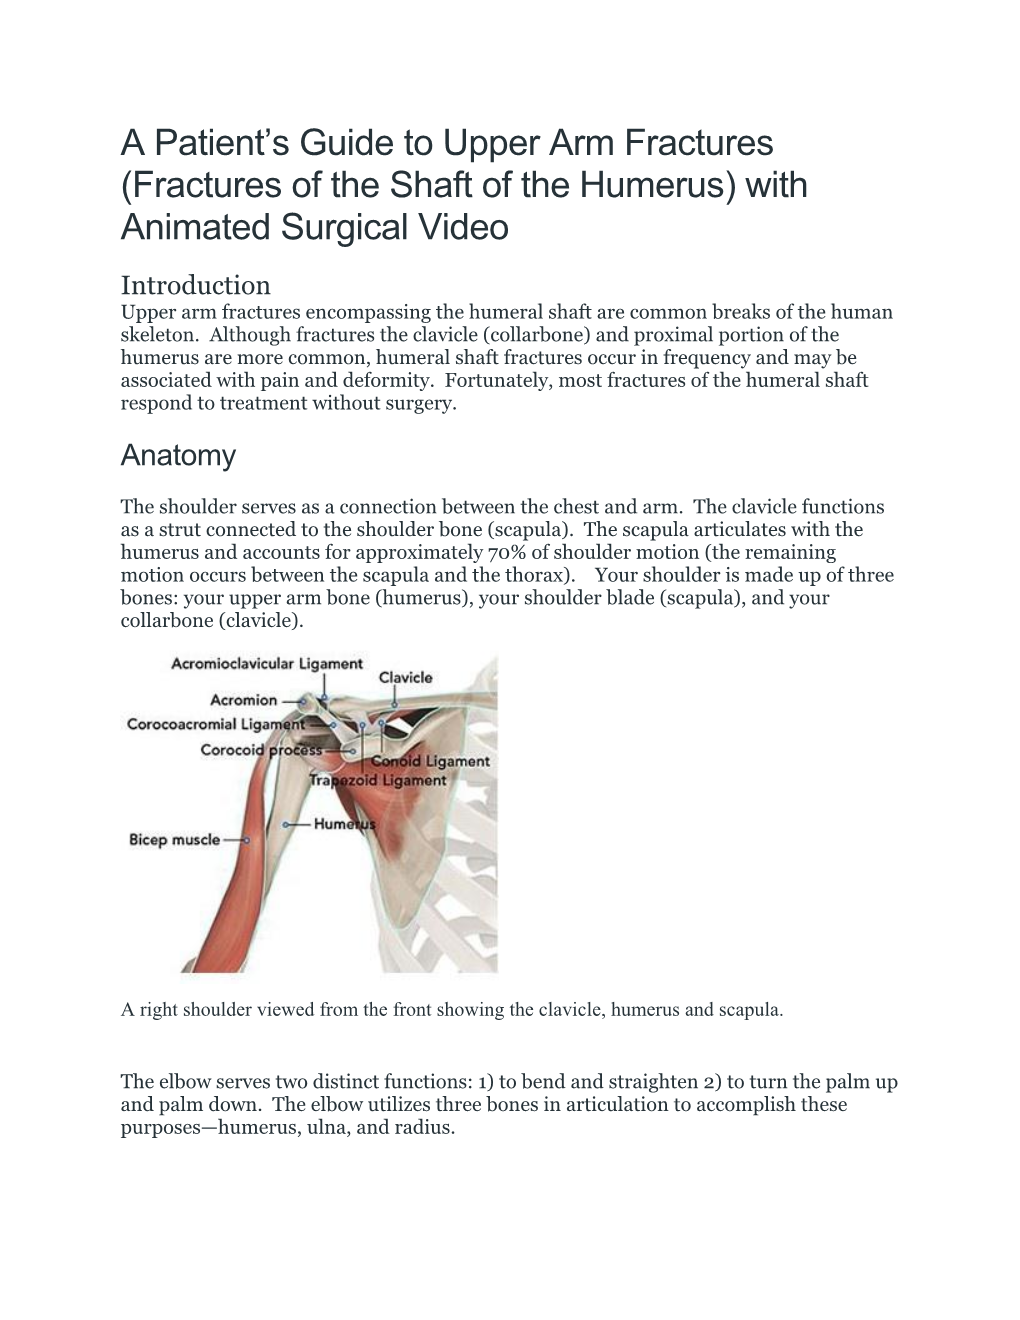 (Fractures of the Shaft of the Humerus) with Animated Surgical Video